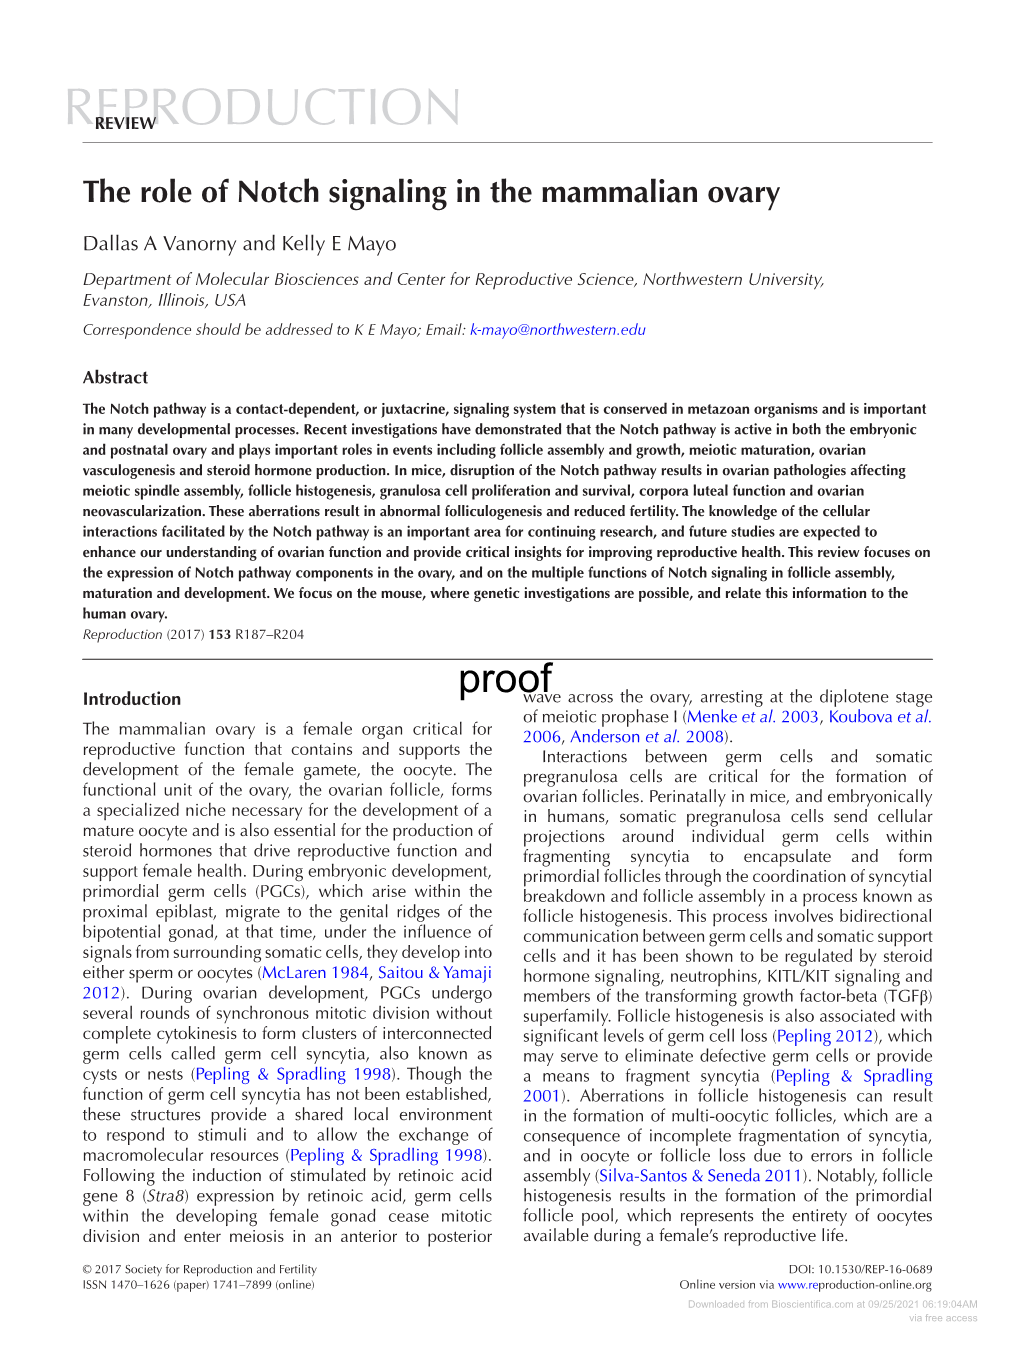 The Role of Notch Signaling in the Mammalian Ovary